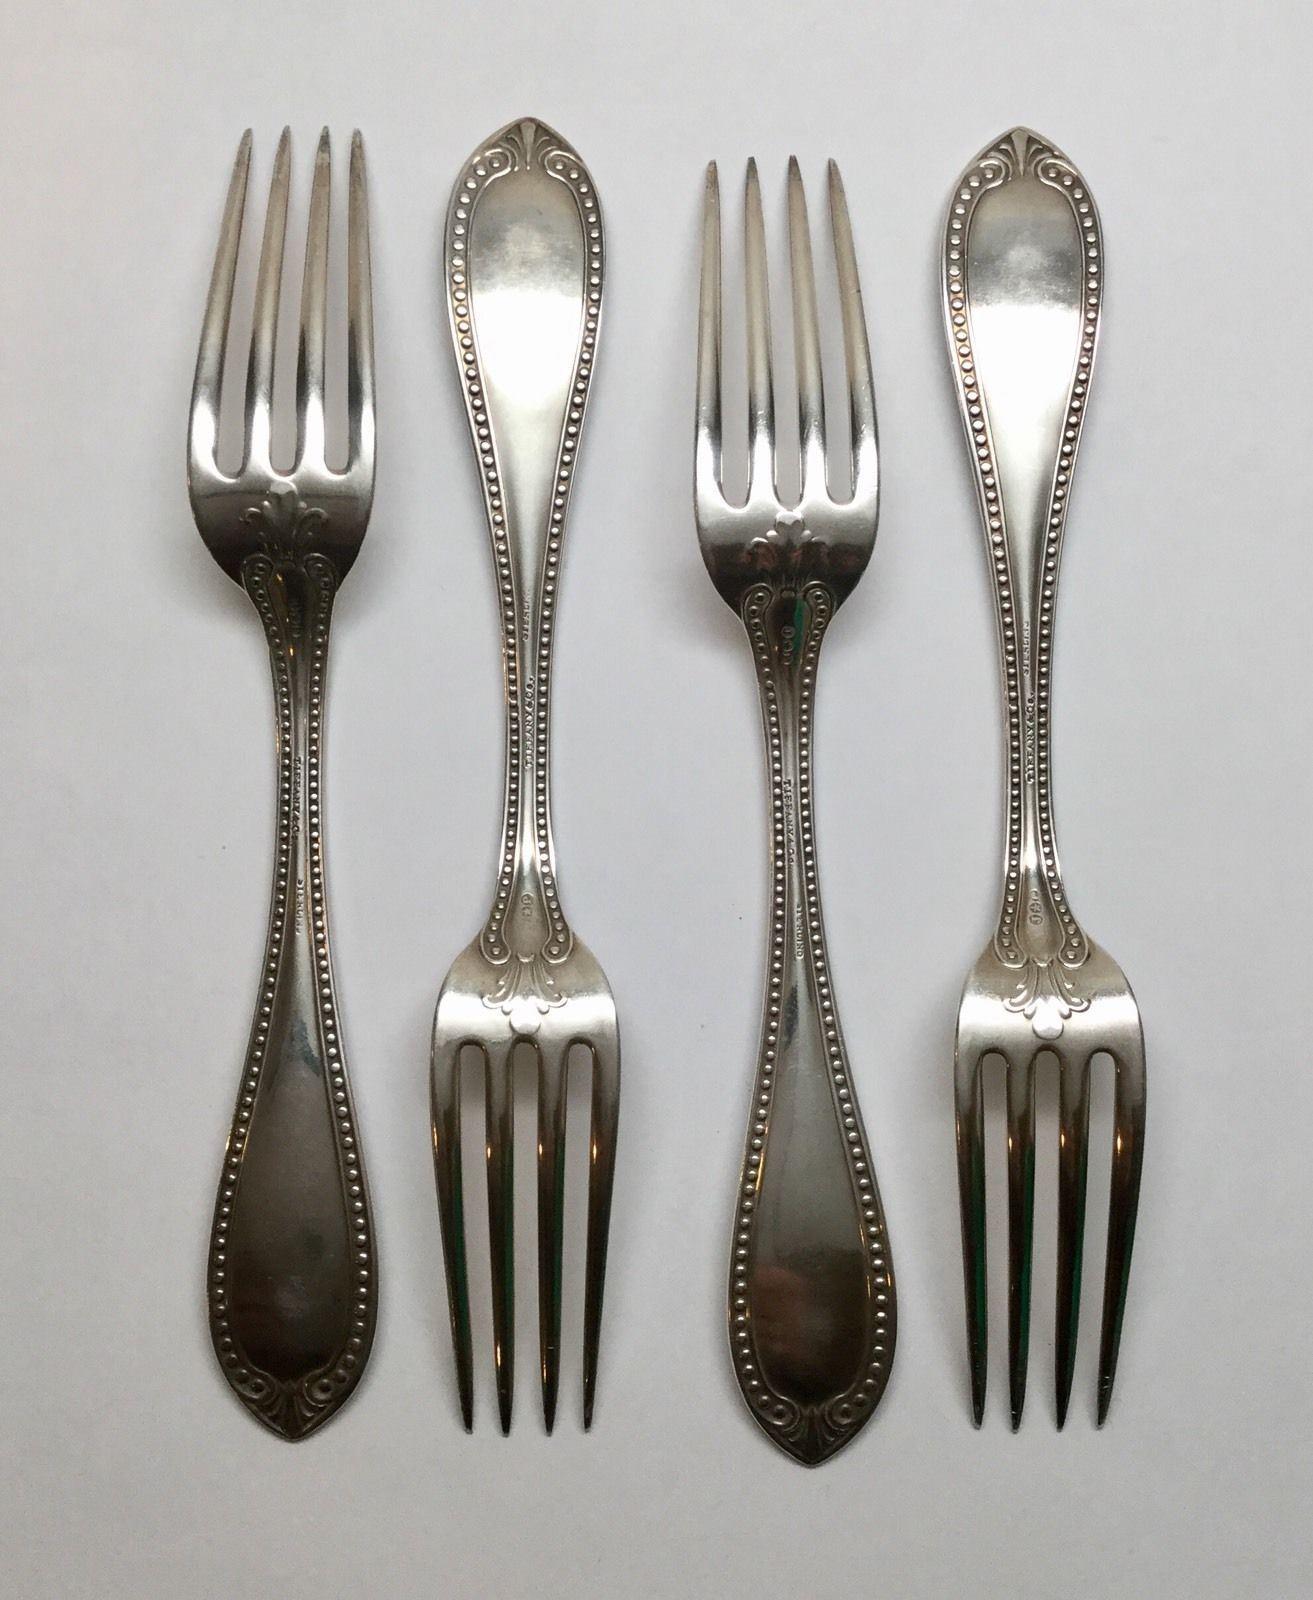 4 John Polhamus for Tiffany & Co. sterling silver forks in the 1850 Bead pattern.
 Marked: J*P, TIFFANY & CO., STERLING. 
Engraved on handles: Louisa Le Huray. 
Measures: 7